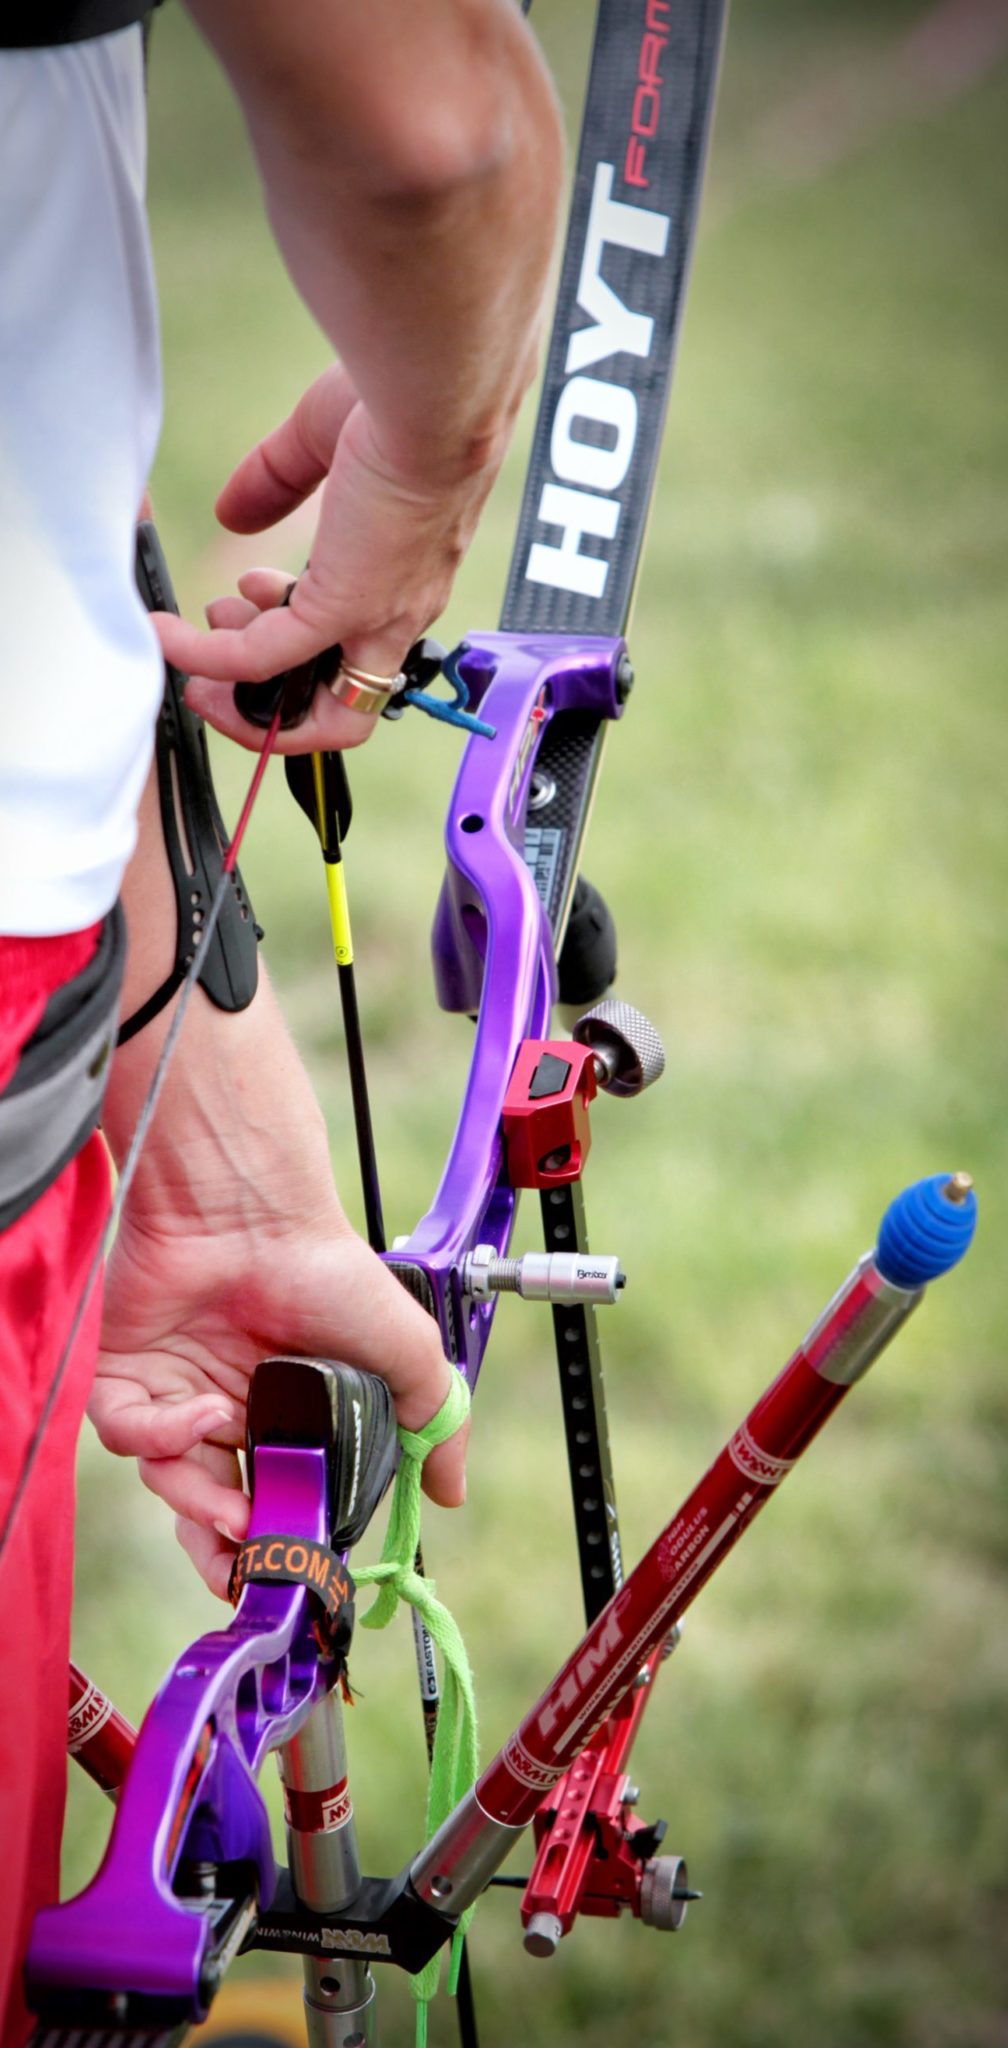 How To Maximise Your Archery Range Time Bow International